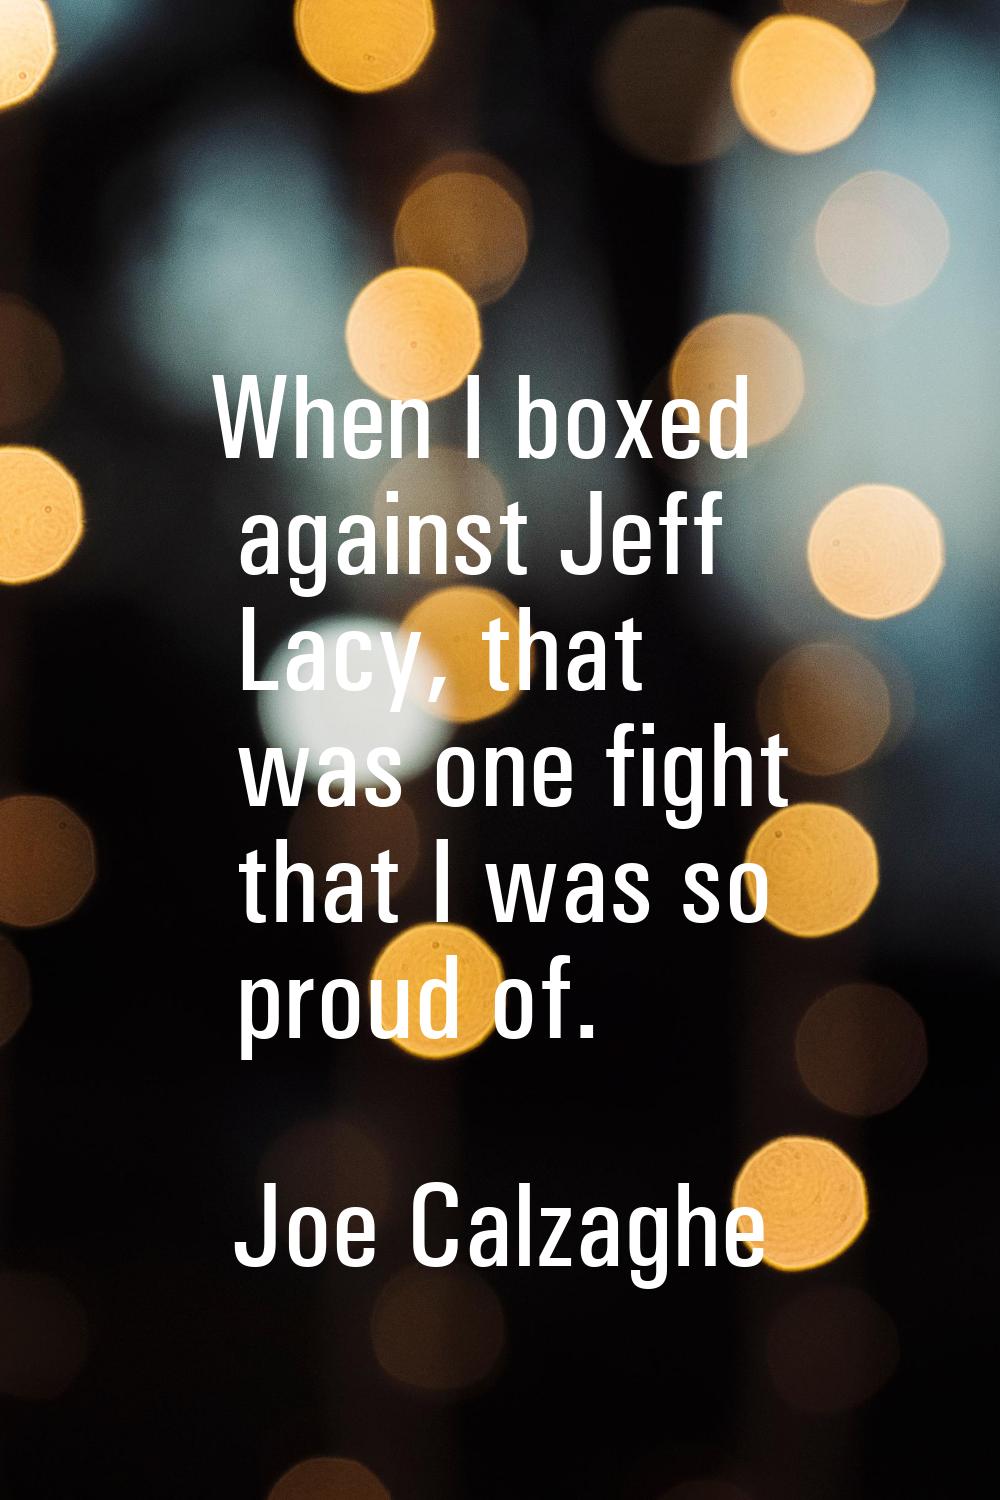 When I boxed against Jeff Lacy, that was one fight that I was so proud of.